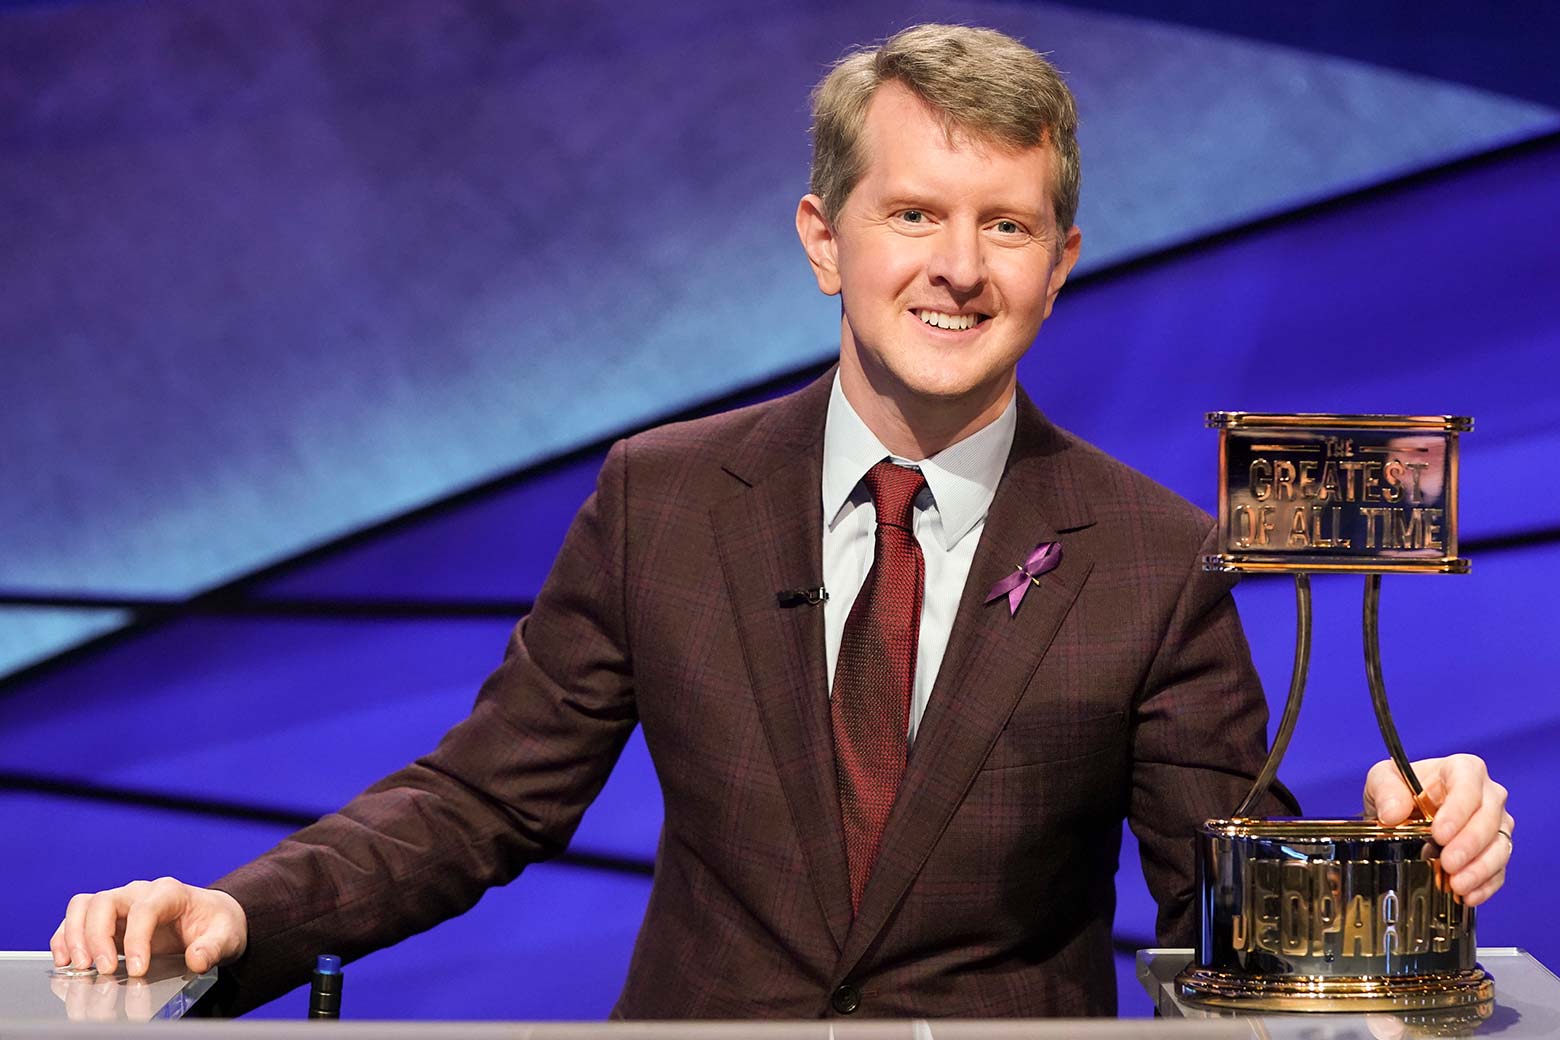 Ken Jennings with the Greatest of All Time Jeopardy trophy.